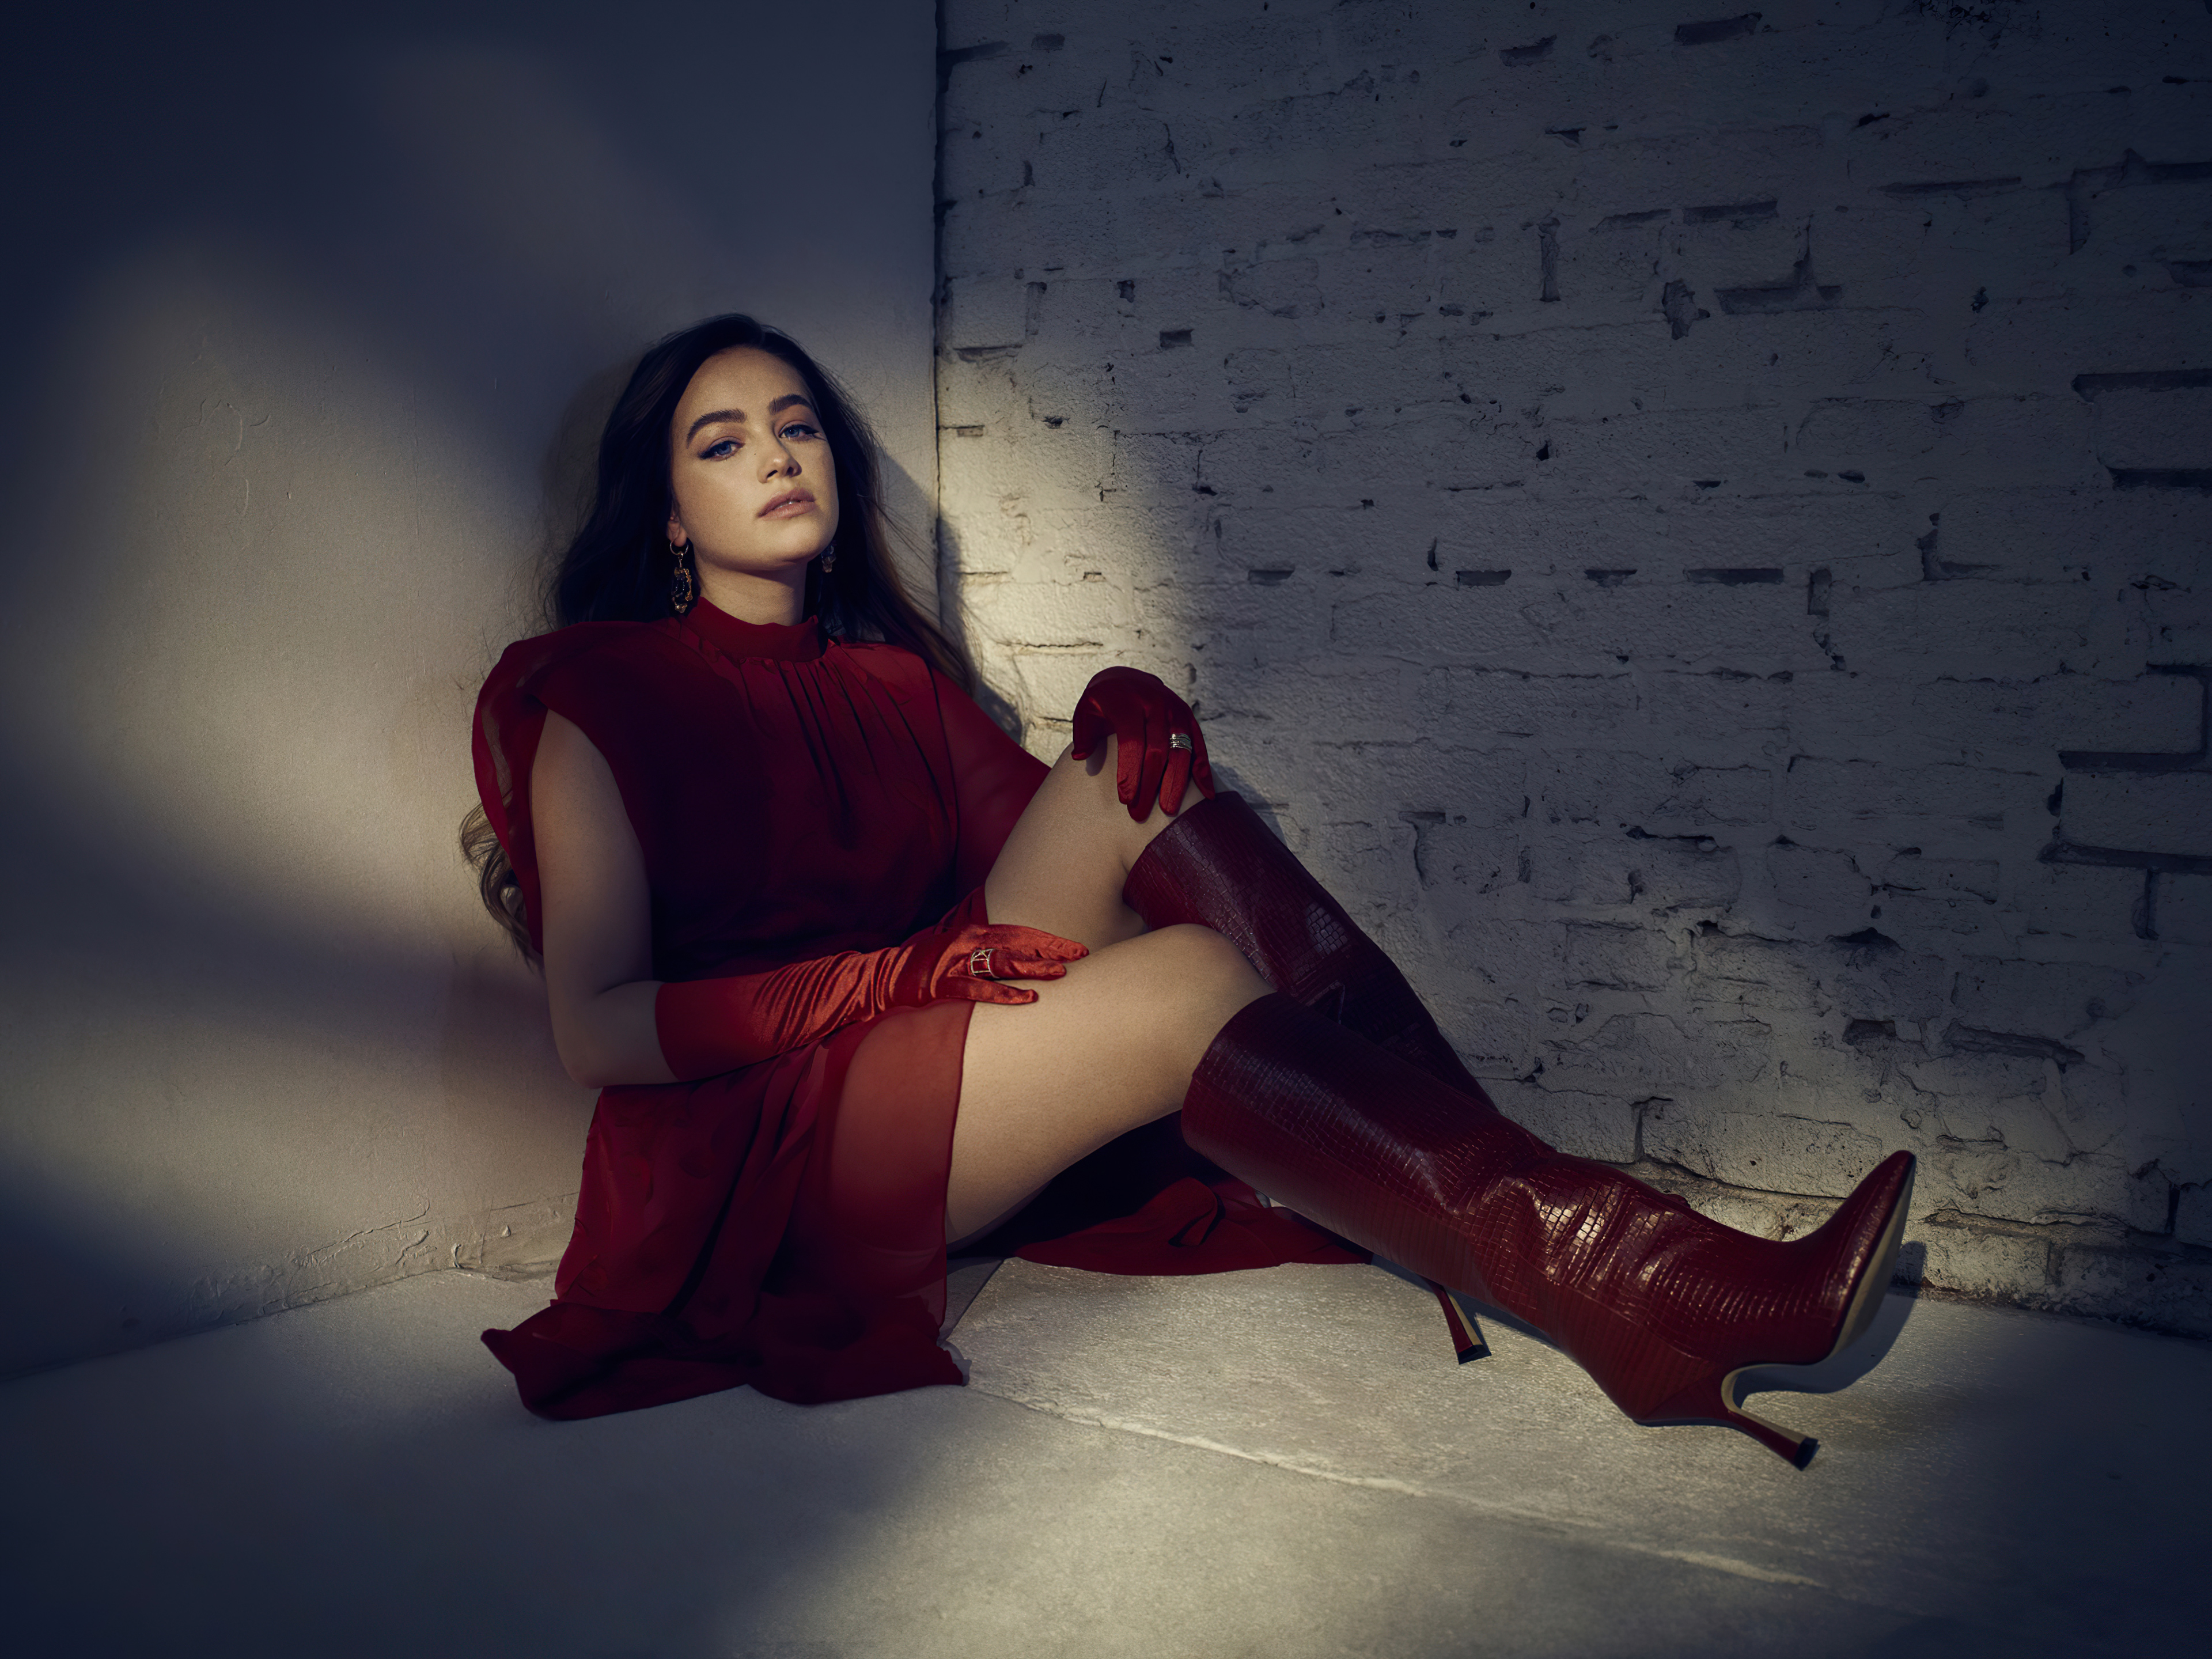 Mary Mouser wearing a red dress, gloves, and boots while sitting